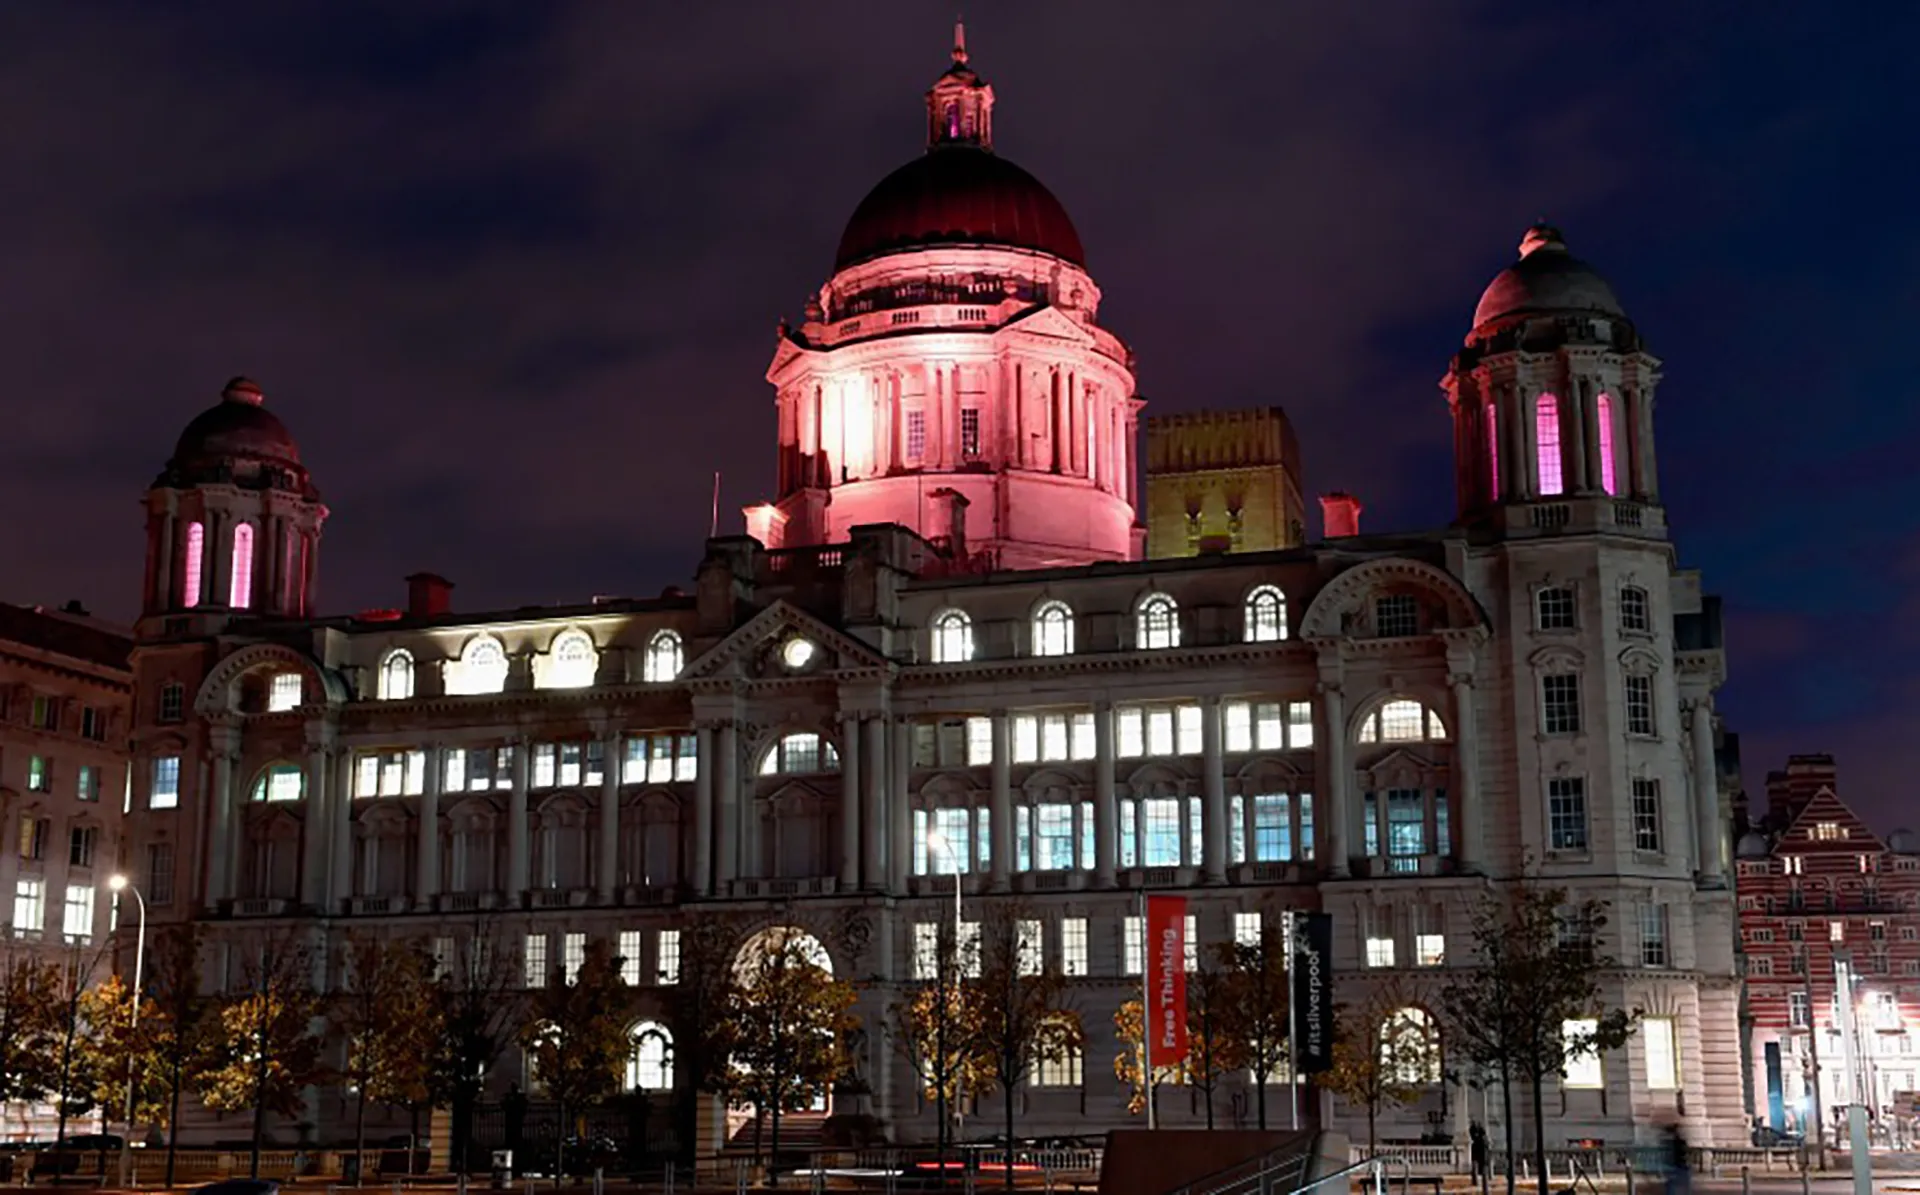 Port of Liverpool building pink for Wear It Pink